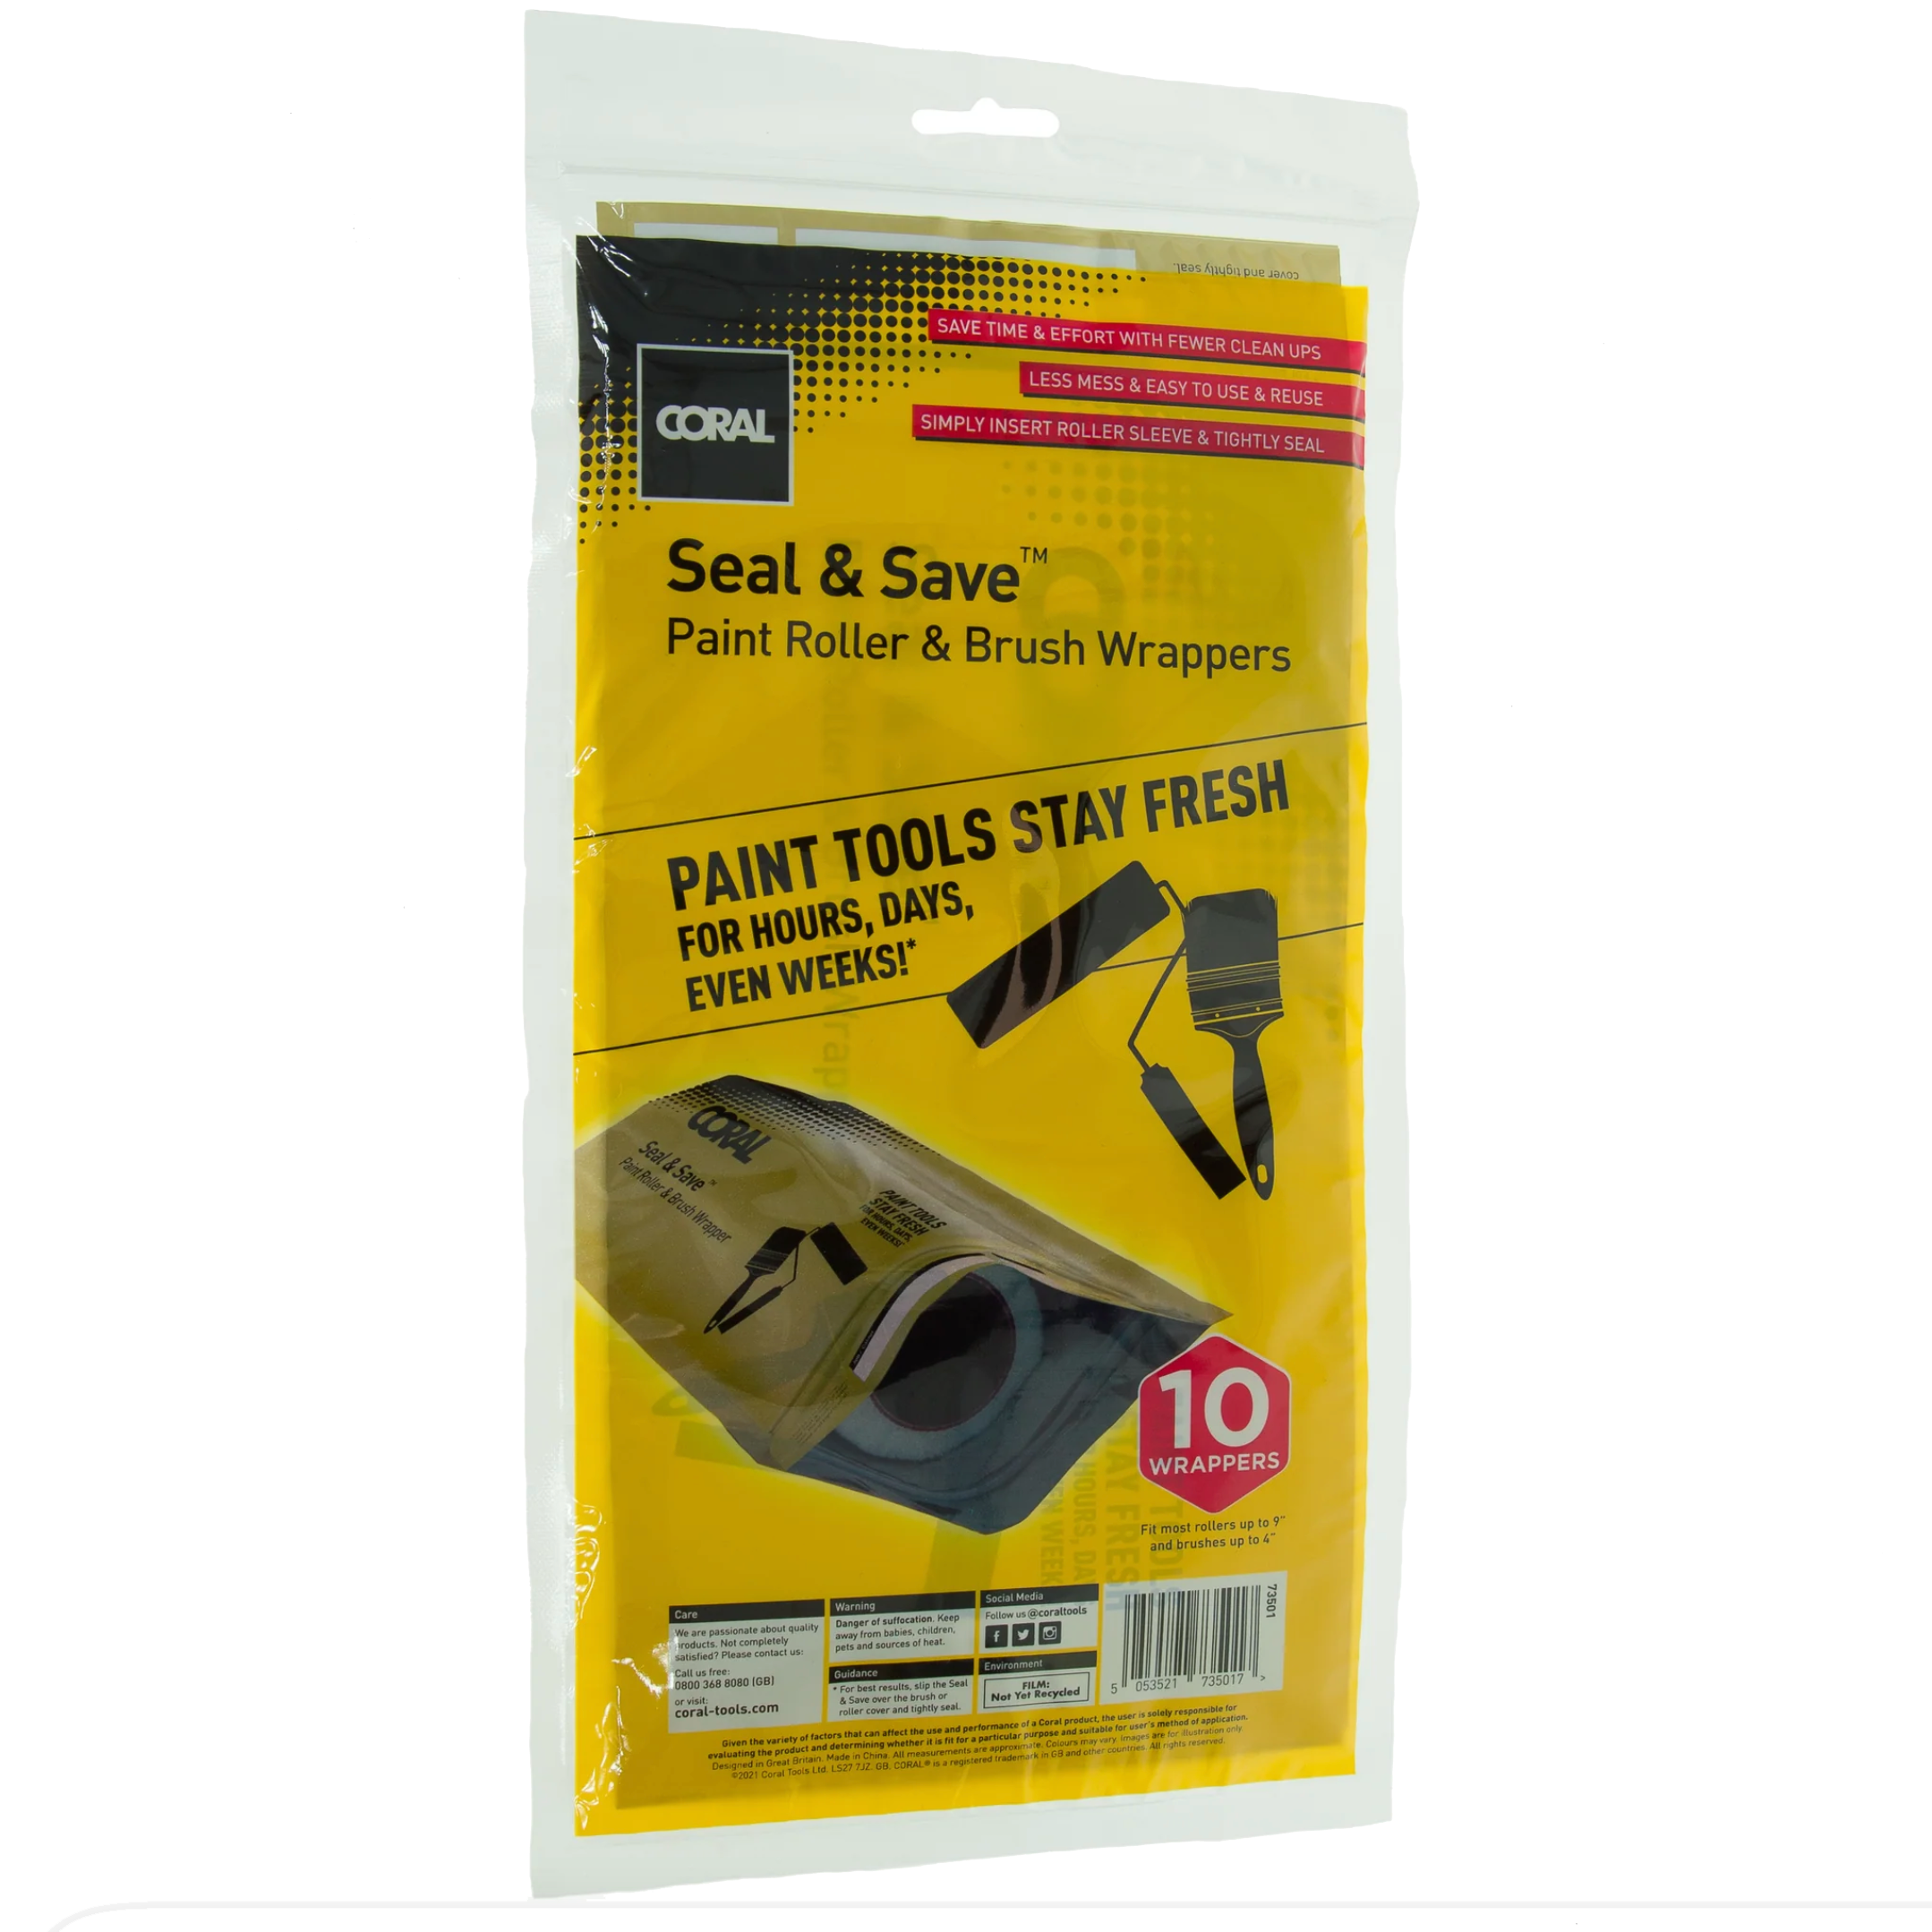 Seal & Save Wrapper for Wet Paint Brushes and Roller Sleeves (10 Pack)